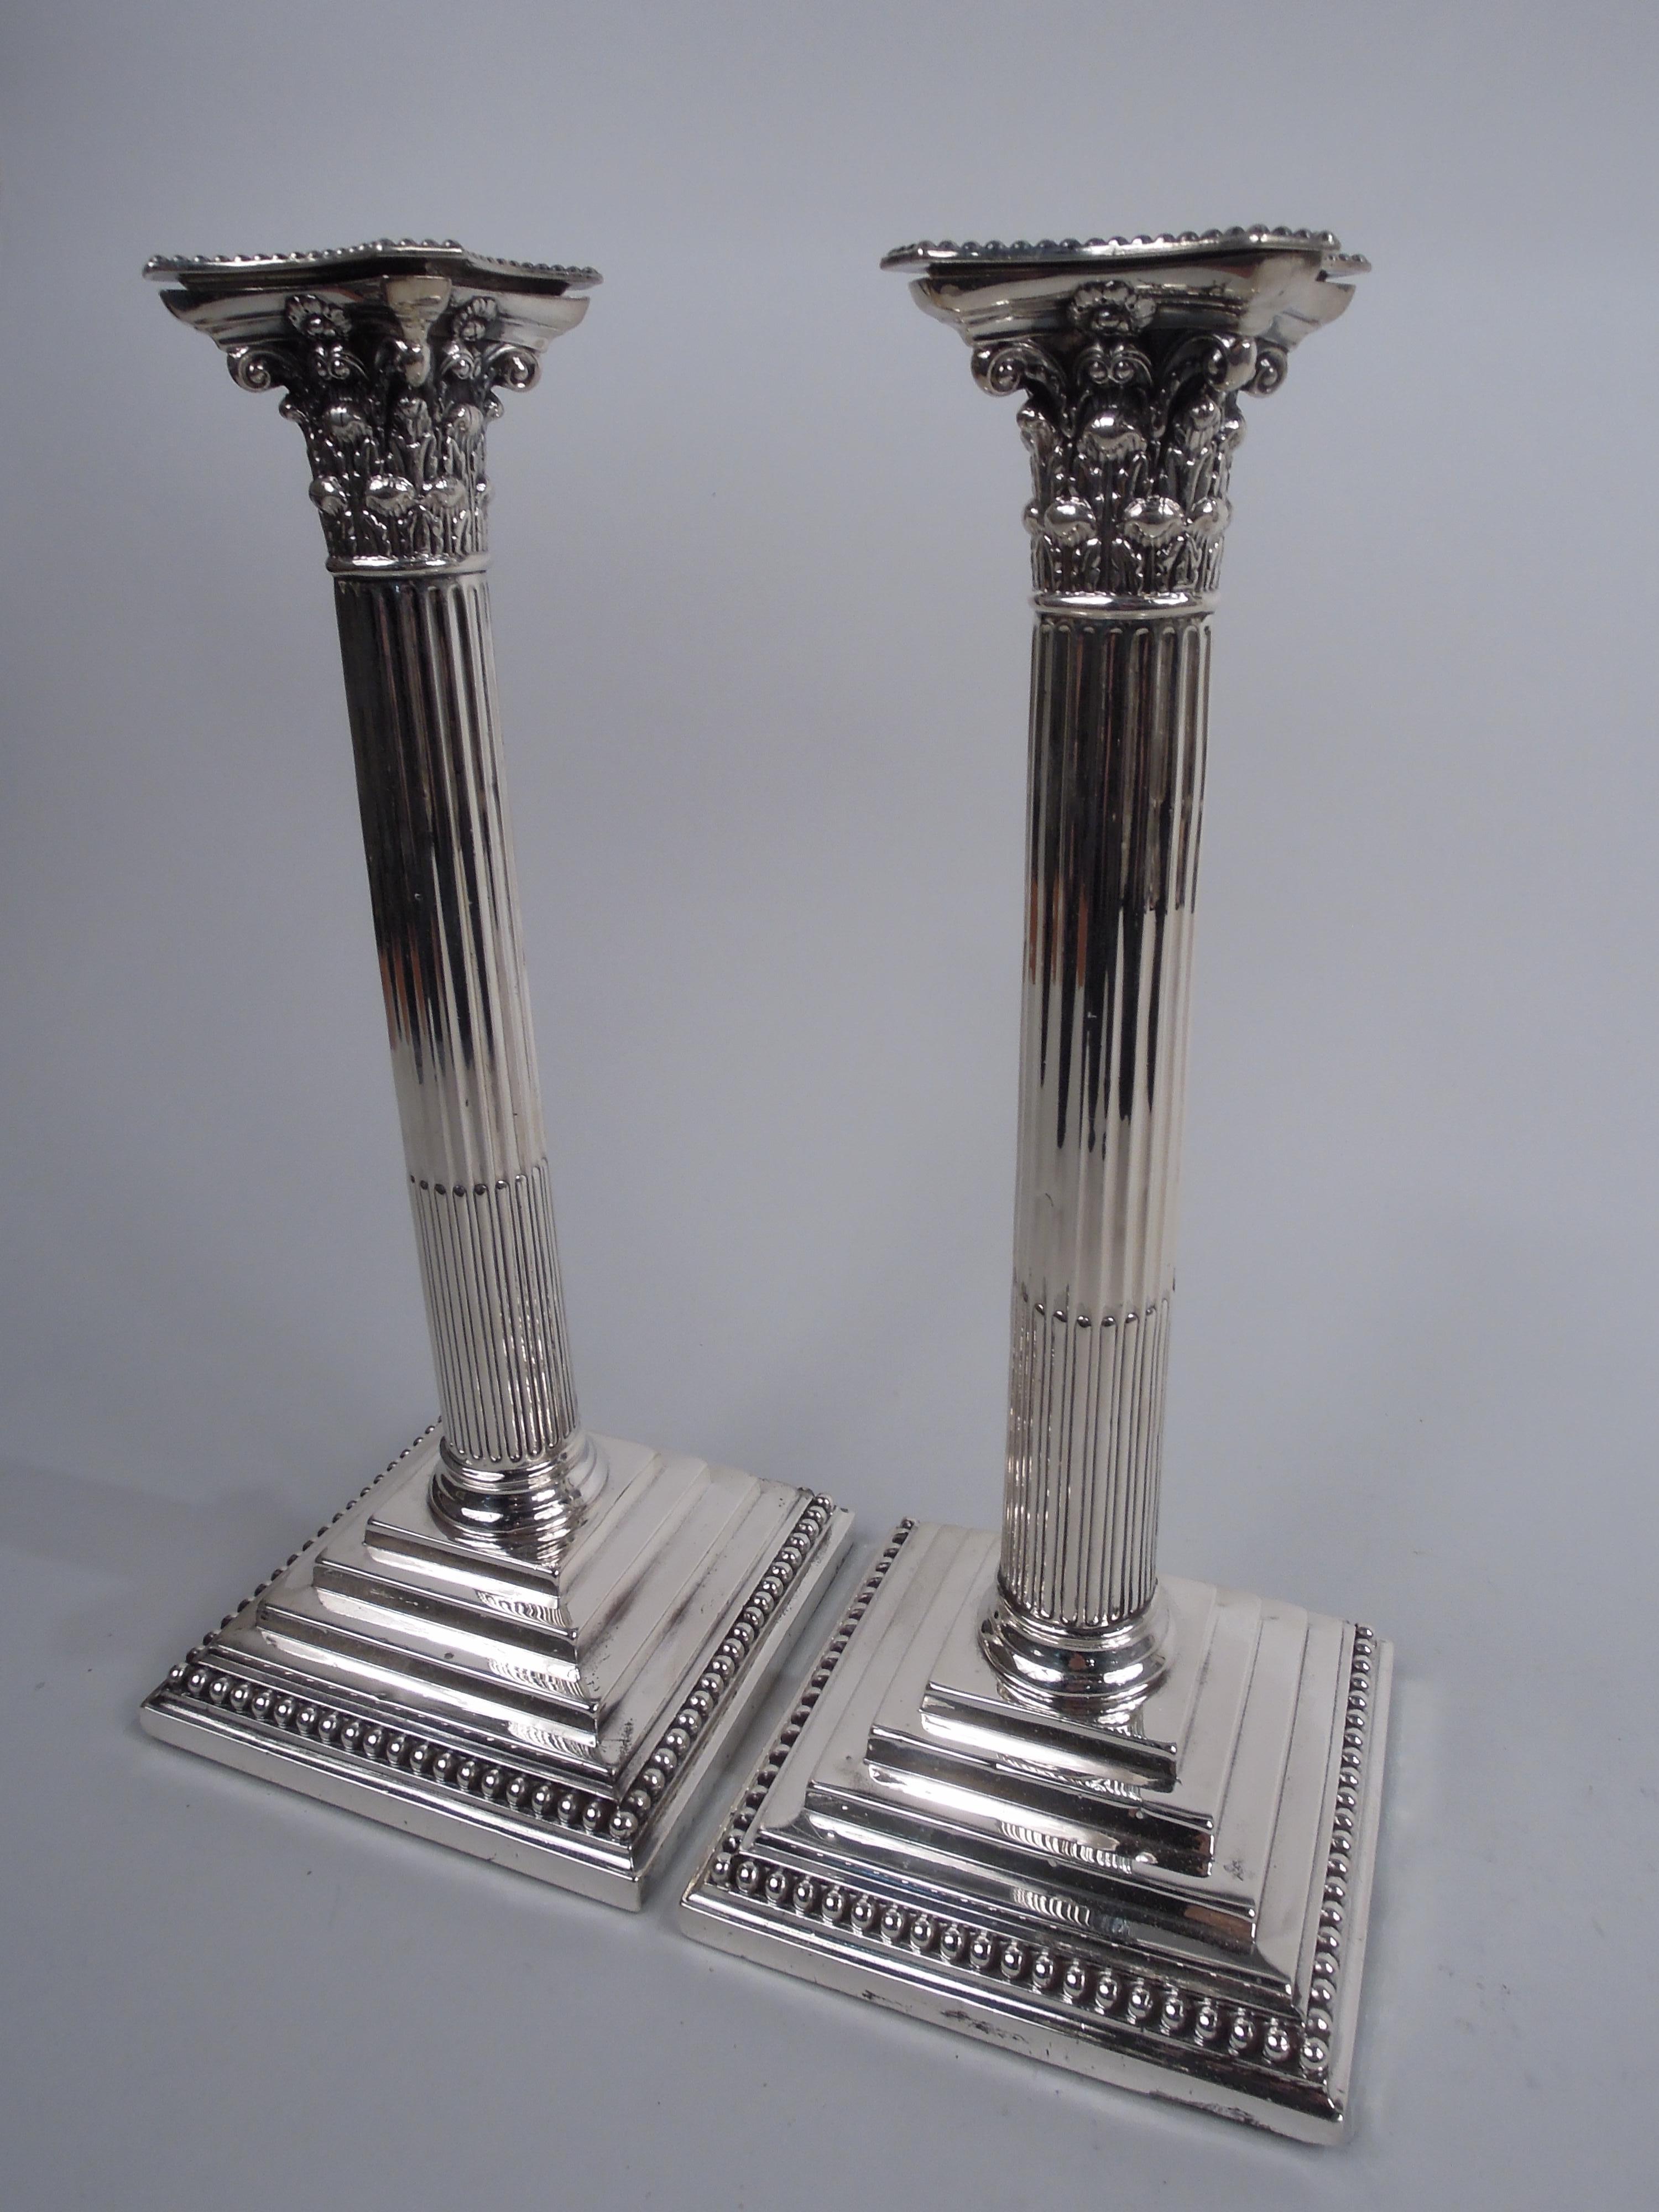 Pair of English Victorian Neoclassical sterling silver candlesticks. Made by William Hutton & Sons in London in 1889. Each: Traditional column with stop-fluted shaft on stepped square foot. Composite Corinthian capital with concave sides and